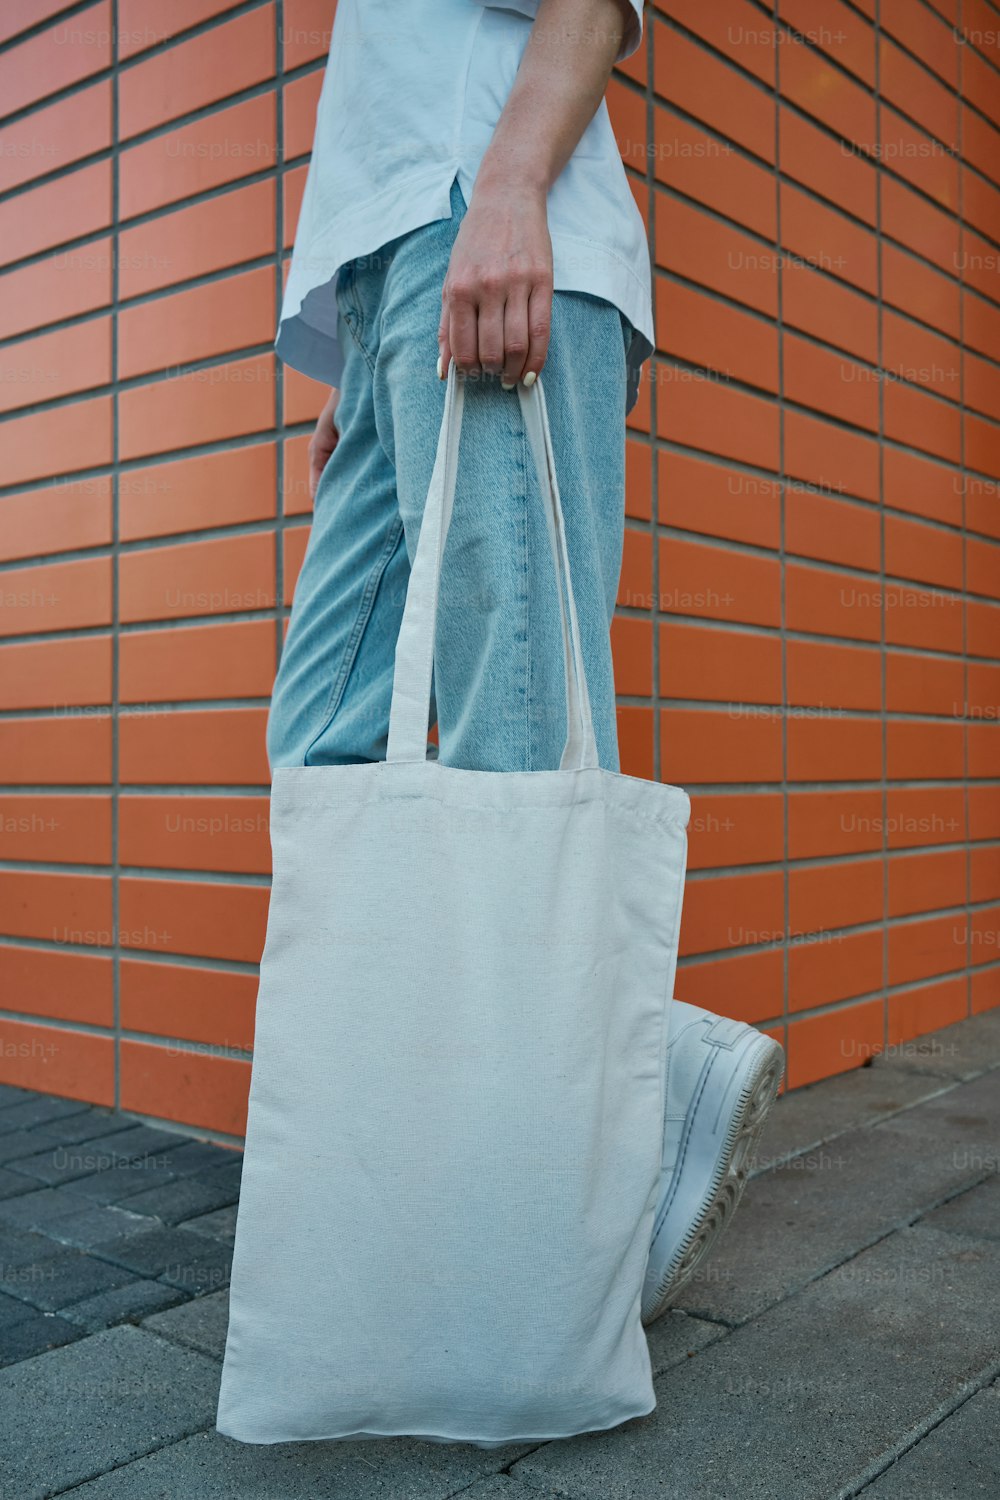 a person carrying a white bag on a sidewalk